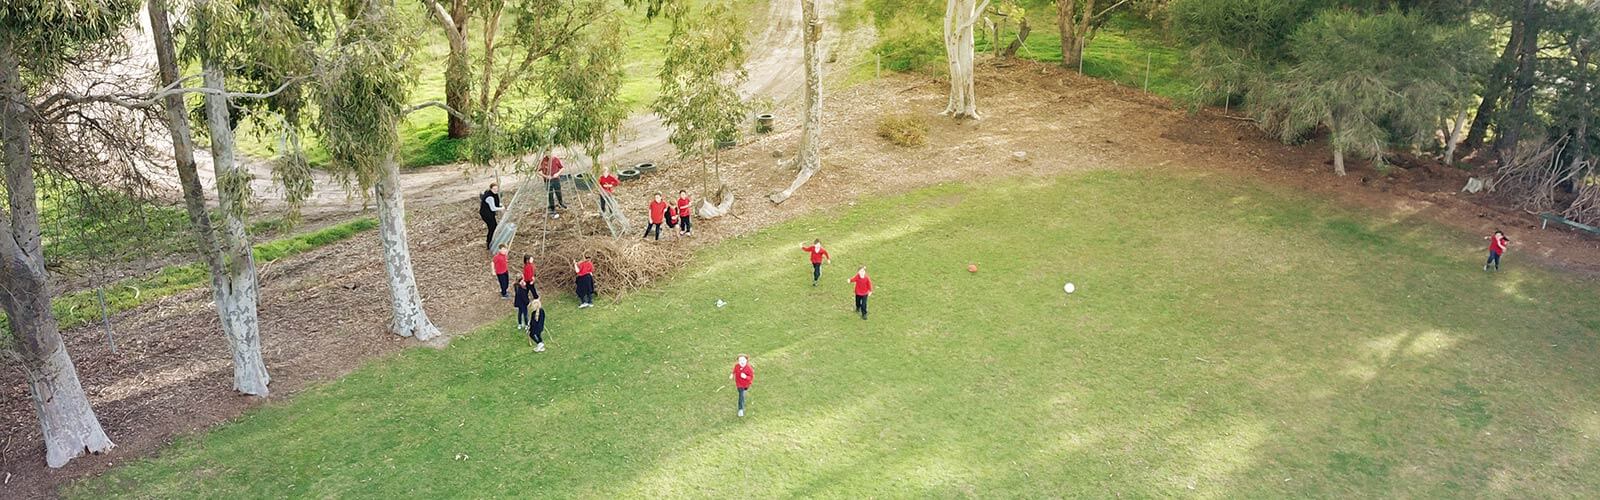 paracombe oval from above nature play